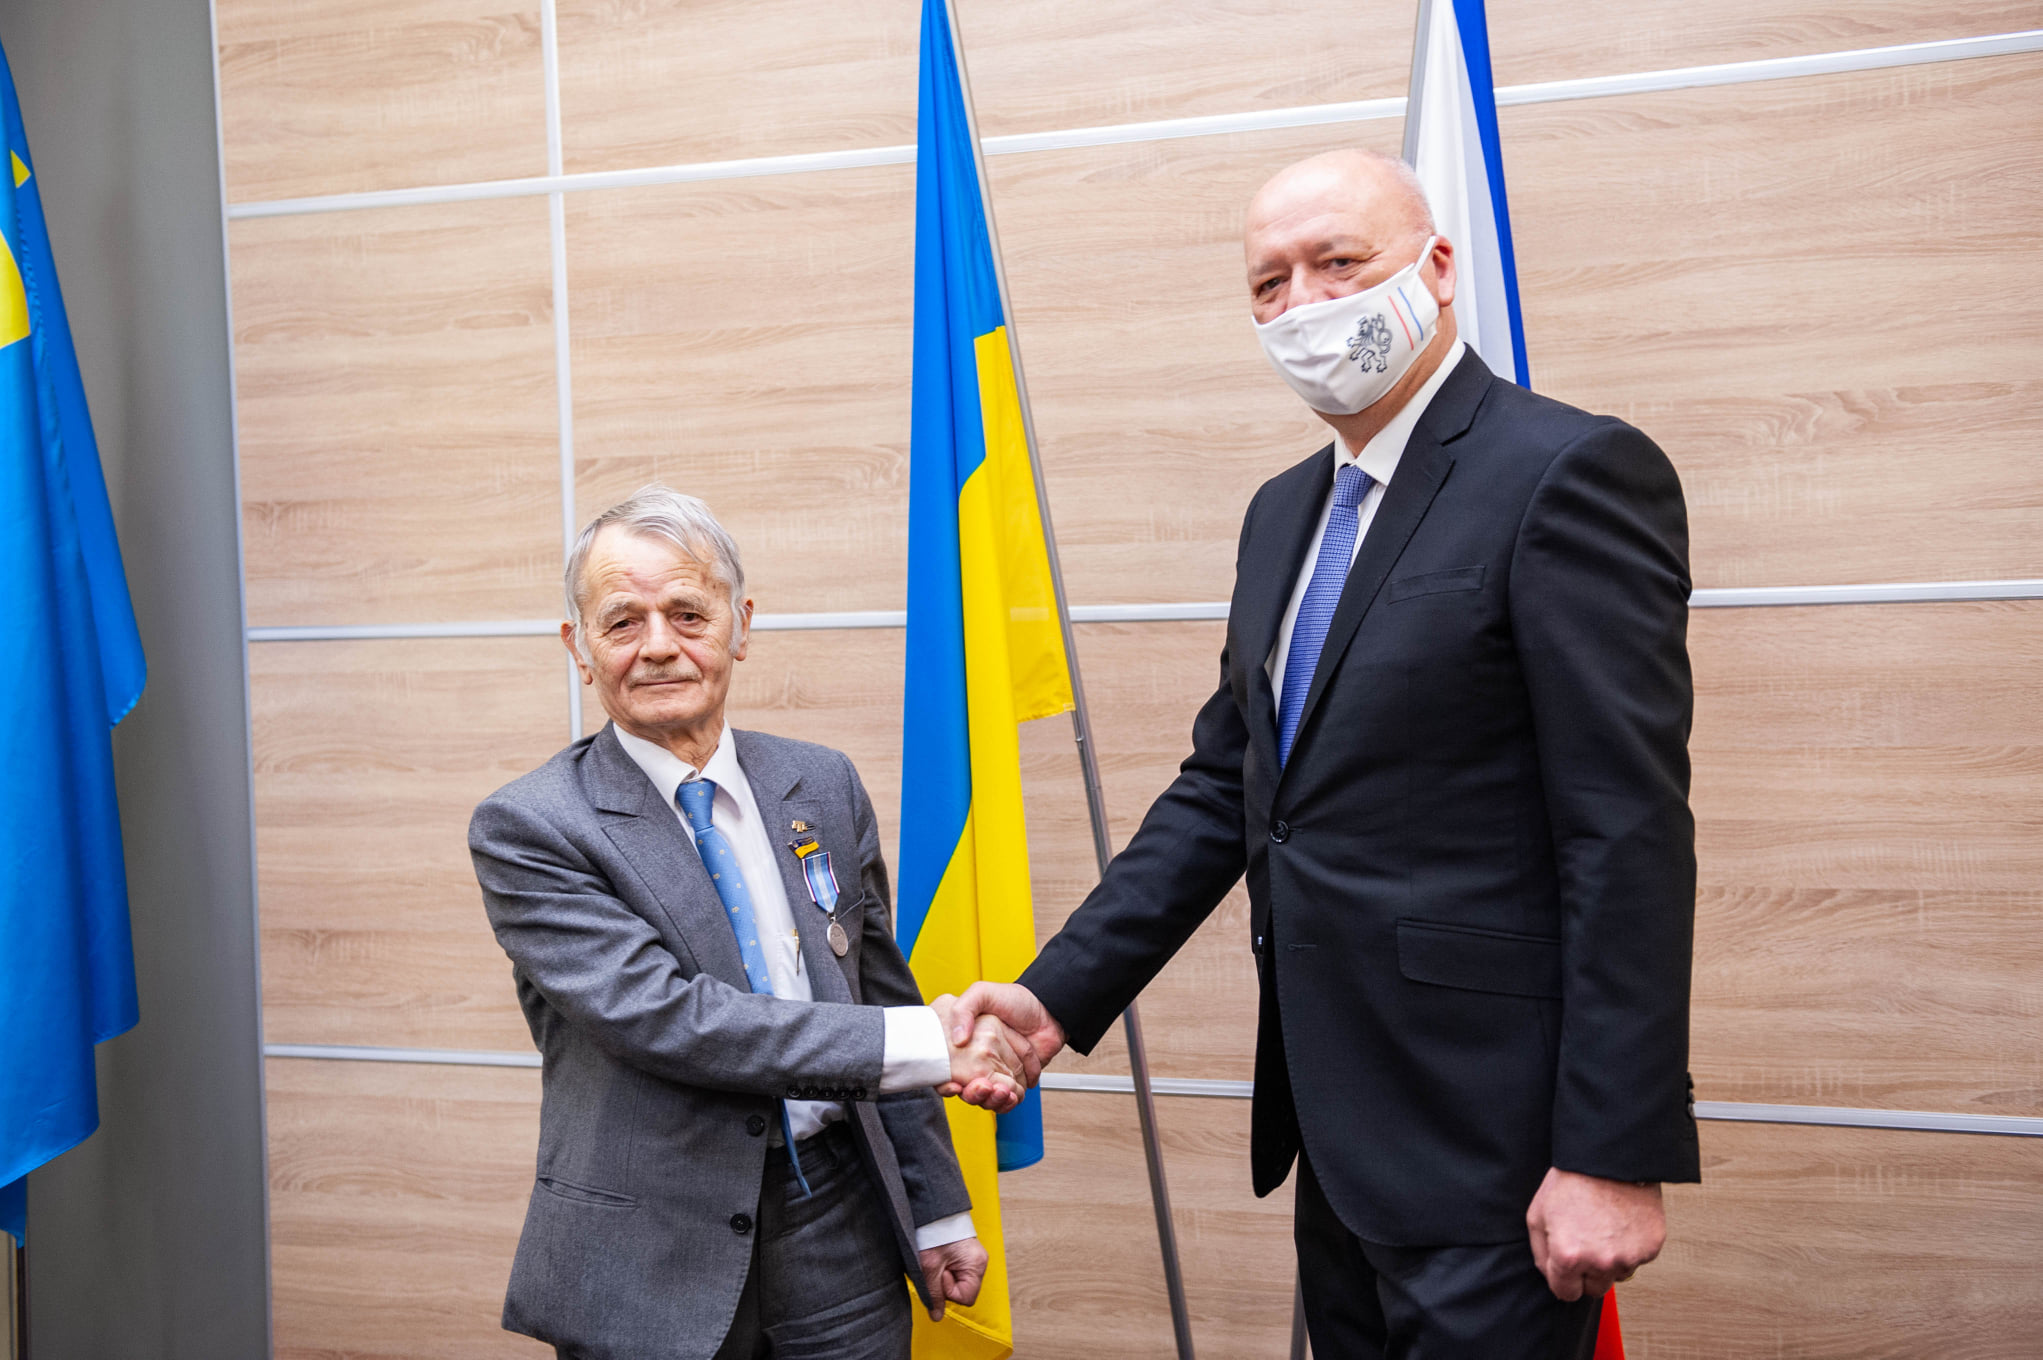 The Ambassador of the Czech Republic awarded the leader of the Crimean Tatars with the medal "For Merits in Diplomacy"